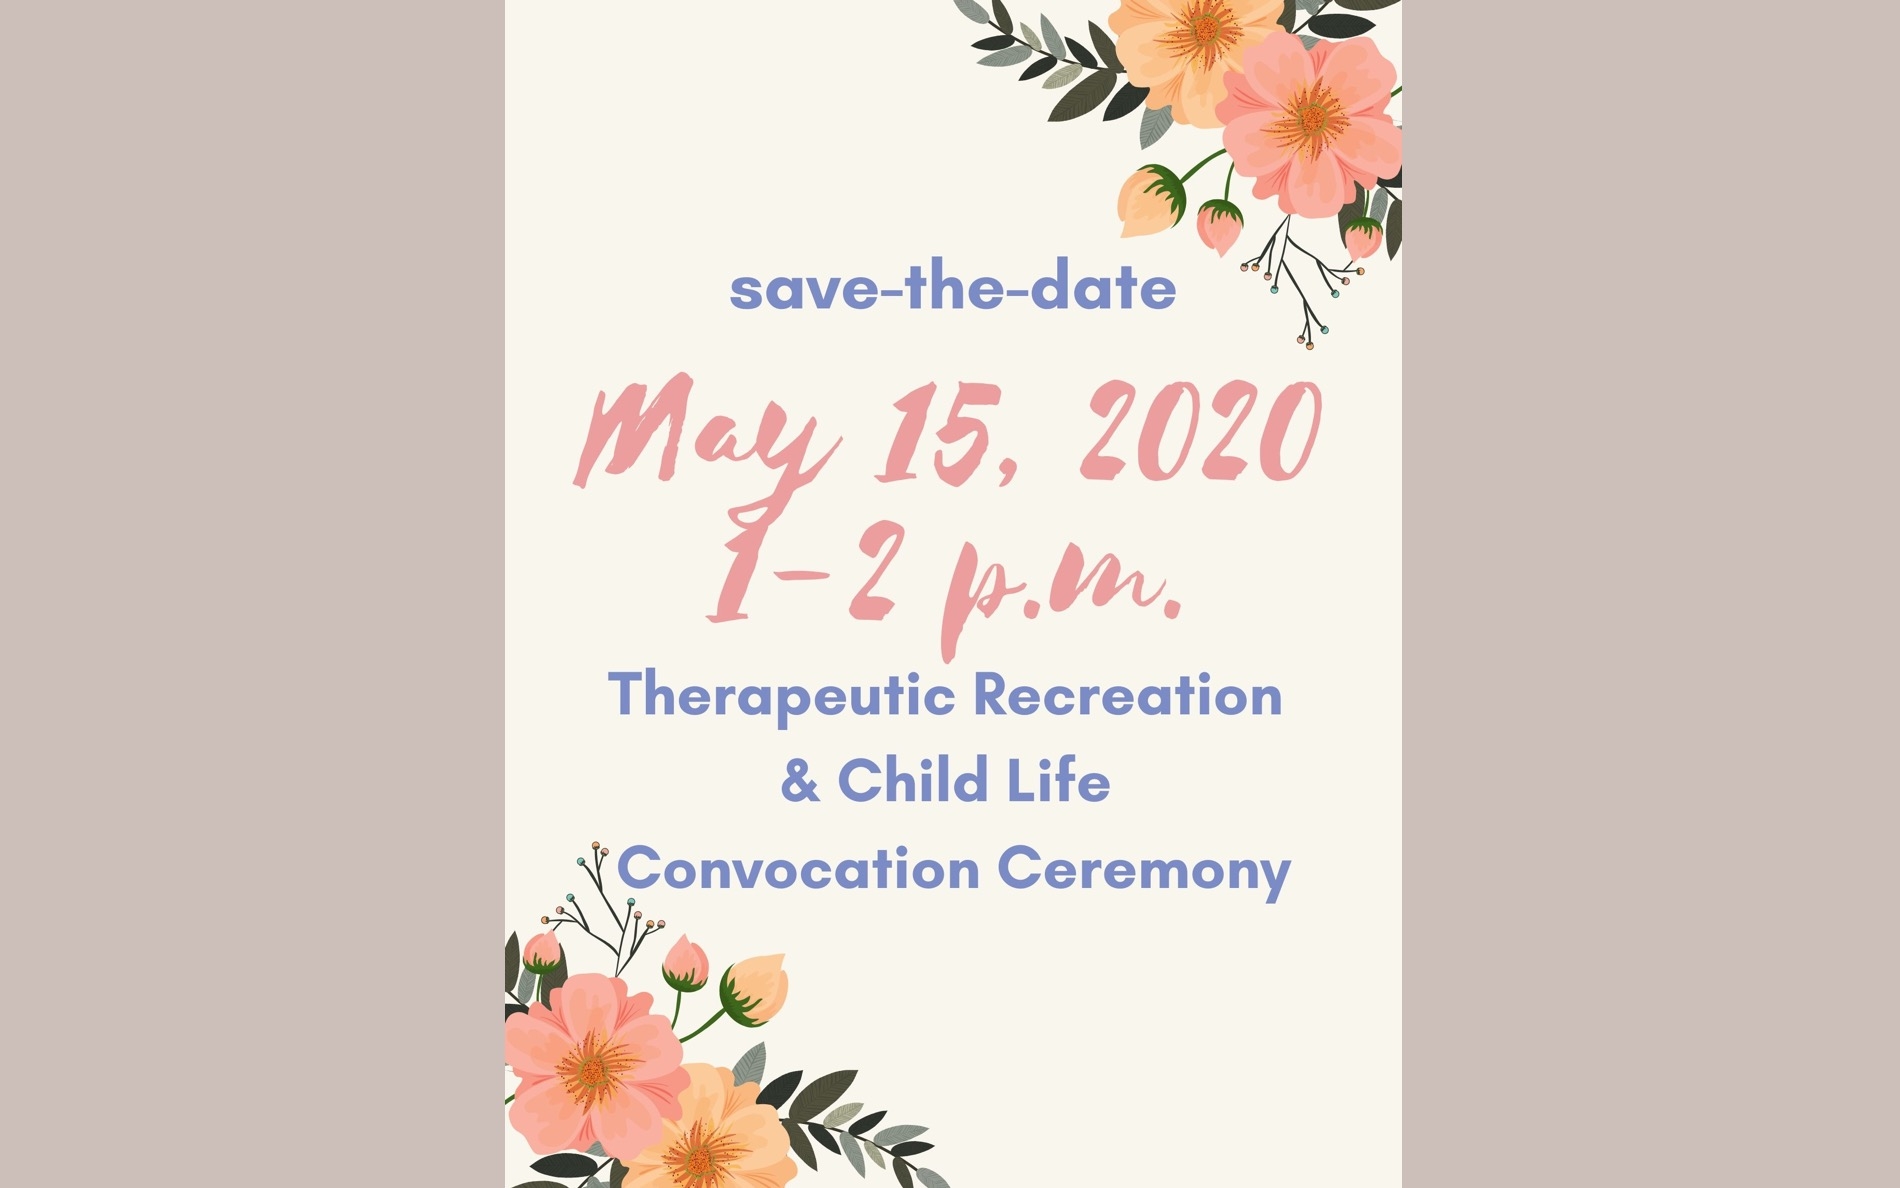 flowers in bottom left and top right - save the date may 15, 2020 1-2p TR & CL Convocation Ceremony